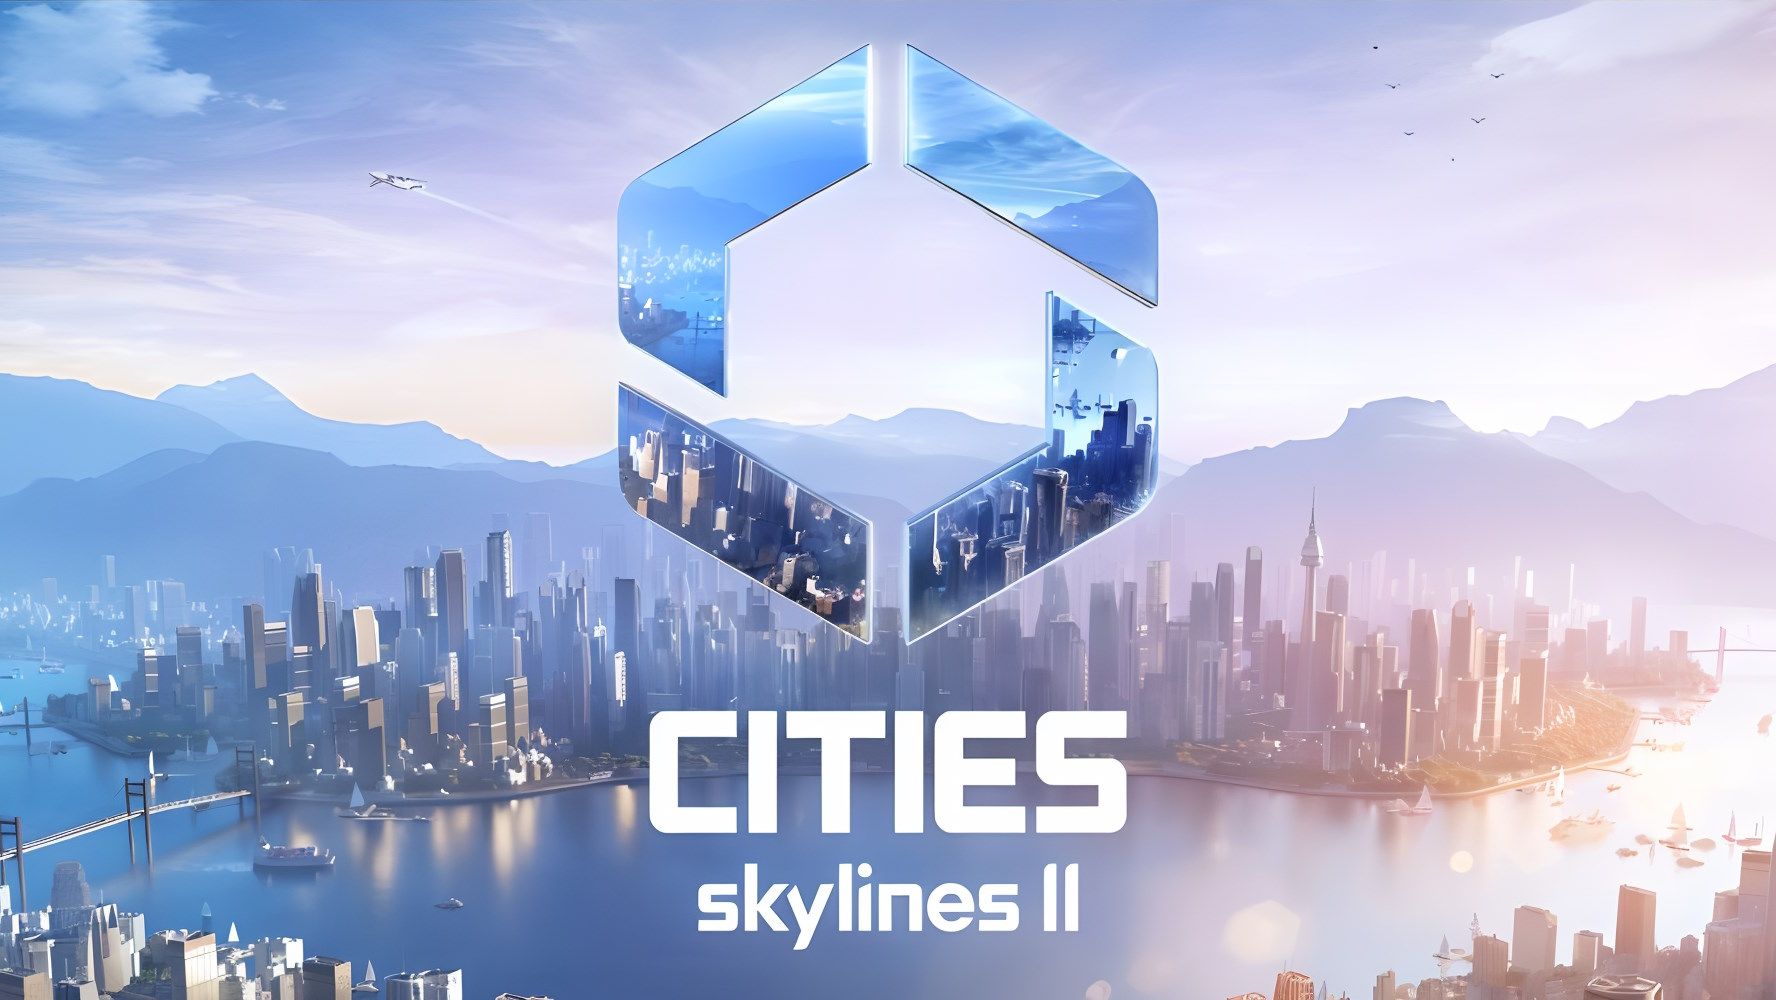 Is It Worth Getting Cities: Skylines 2 Right Now? – Answered